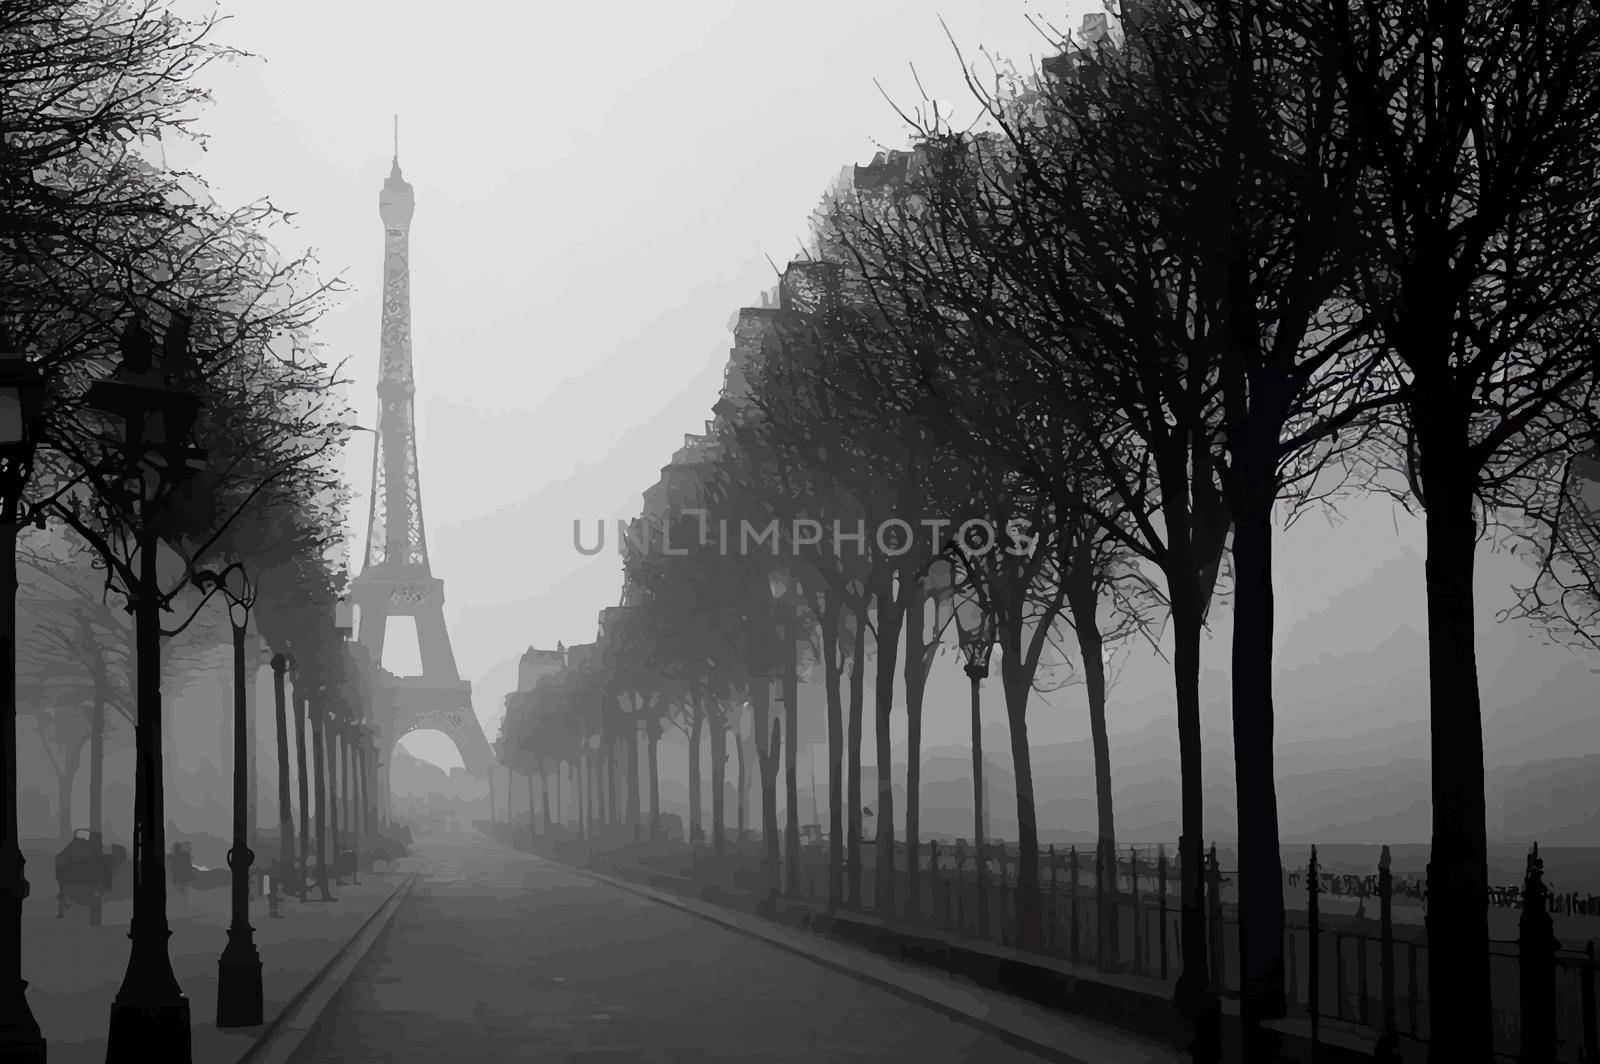 view of paris street with the Eiffel Tower in the background in a foggy day by JpRamos